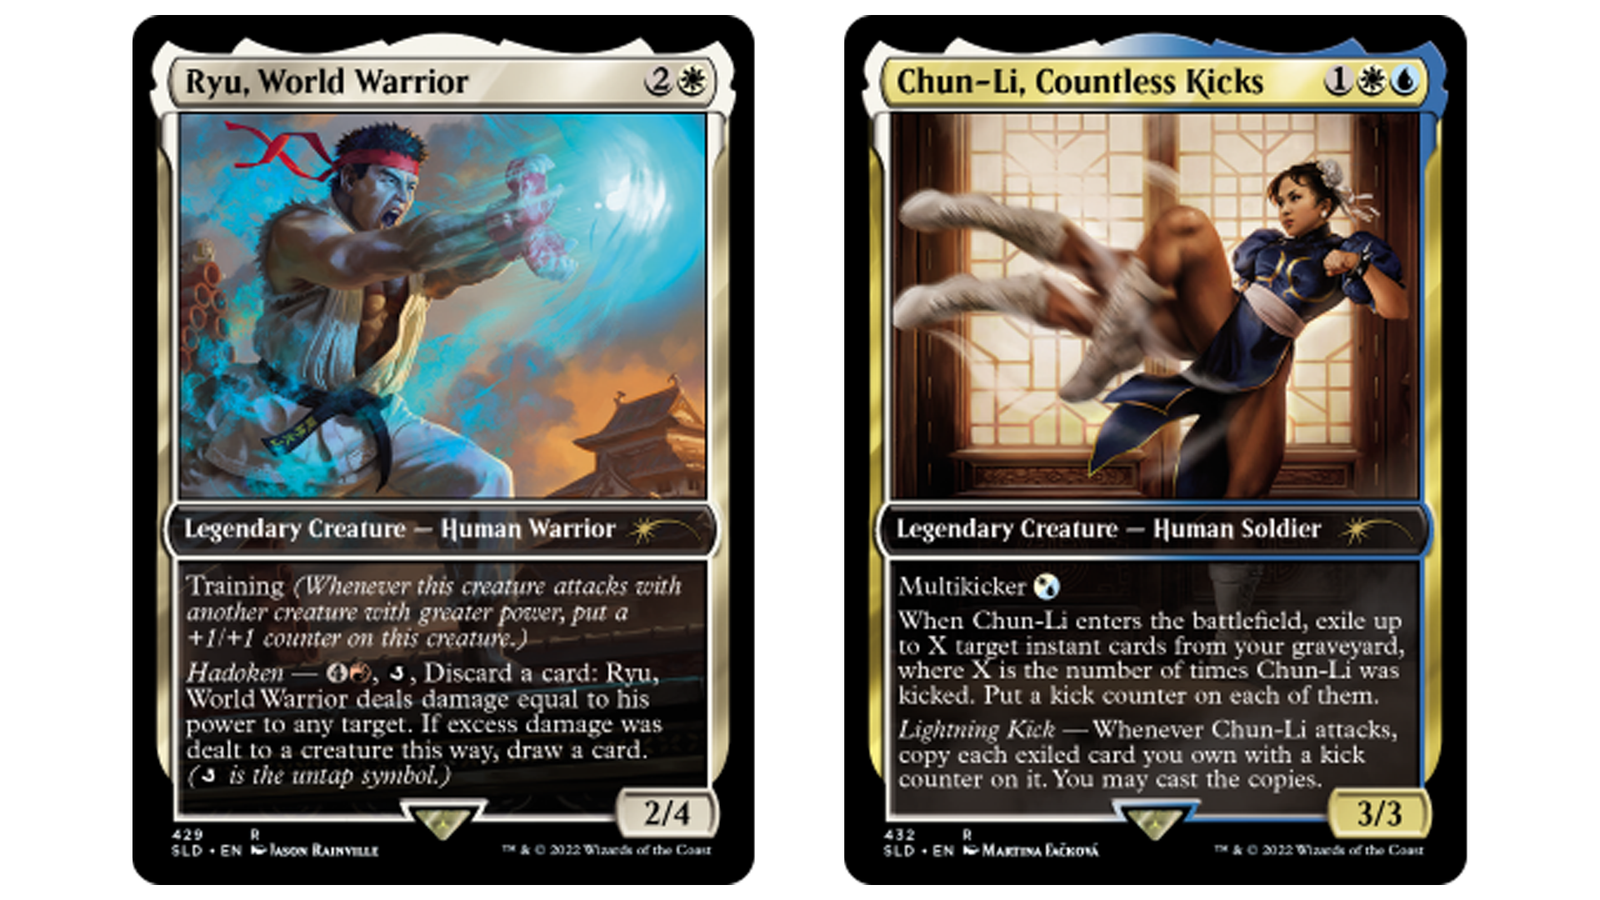 Street Fighter themed Magic: The Gathering cards revealed